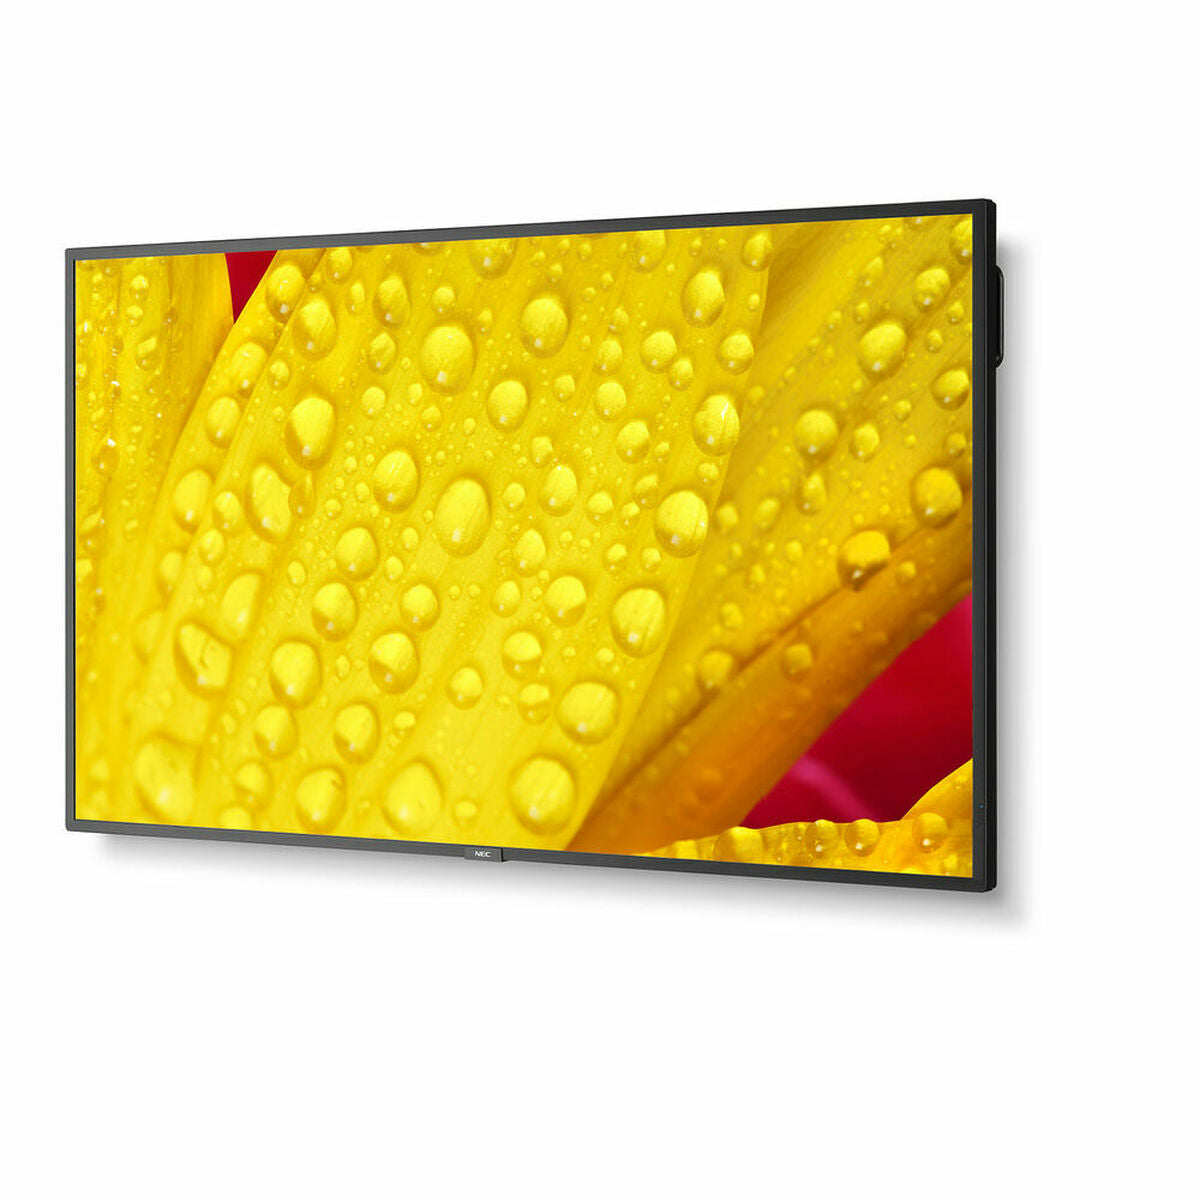 Monitor Videowall NEC ME651 65" IPS D-LED 60 Hz, NEC, Computing, monitor-videowall-nec-me651-65-ips-d-led-60-hz, :Ultra HD, Brand_NEC, category-reference-2609, category-reference-2642, category-reference-2644, category-reference-t-19685, category-reference-t-19902, computers / peripherals, Condition_NEW, office, Price_+ 1000, Teleworking, RiotNook